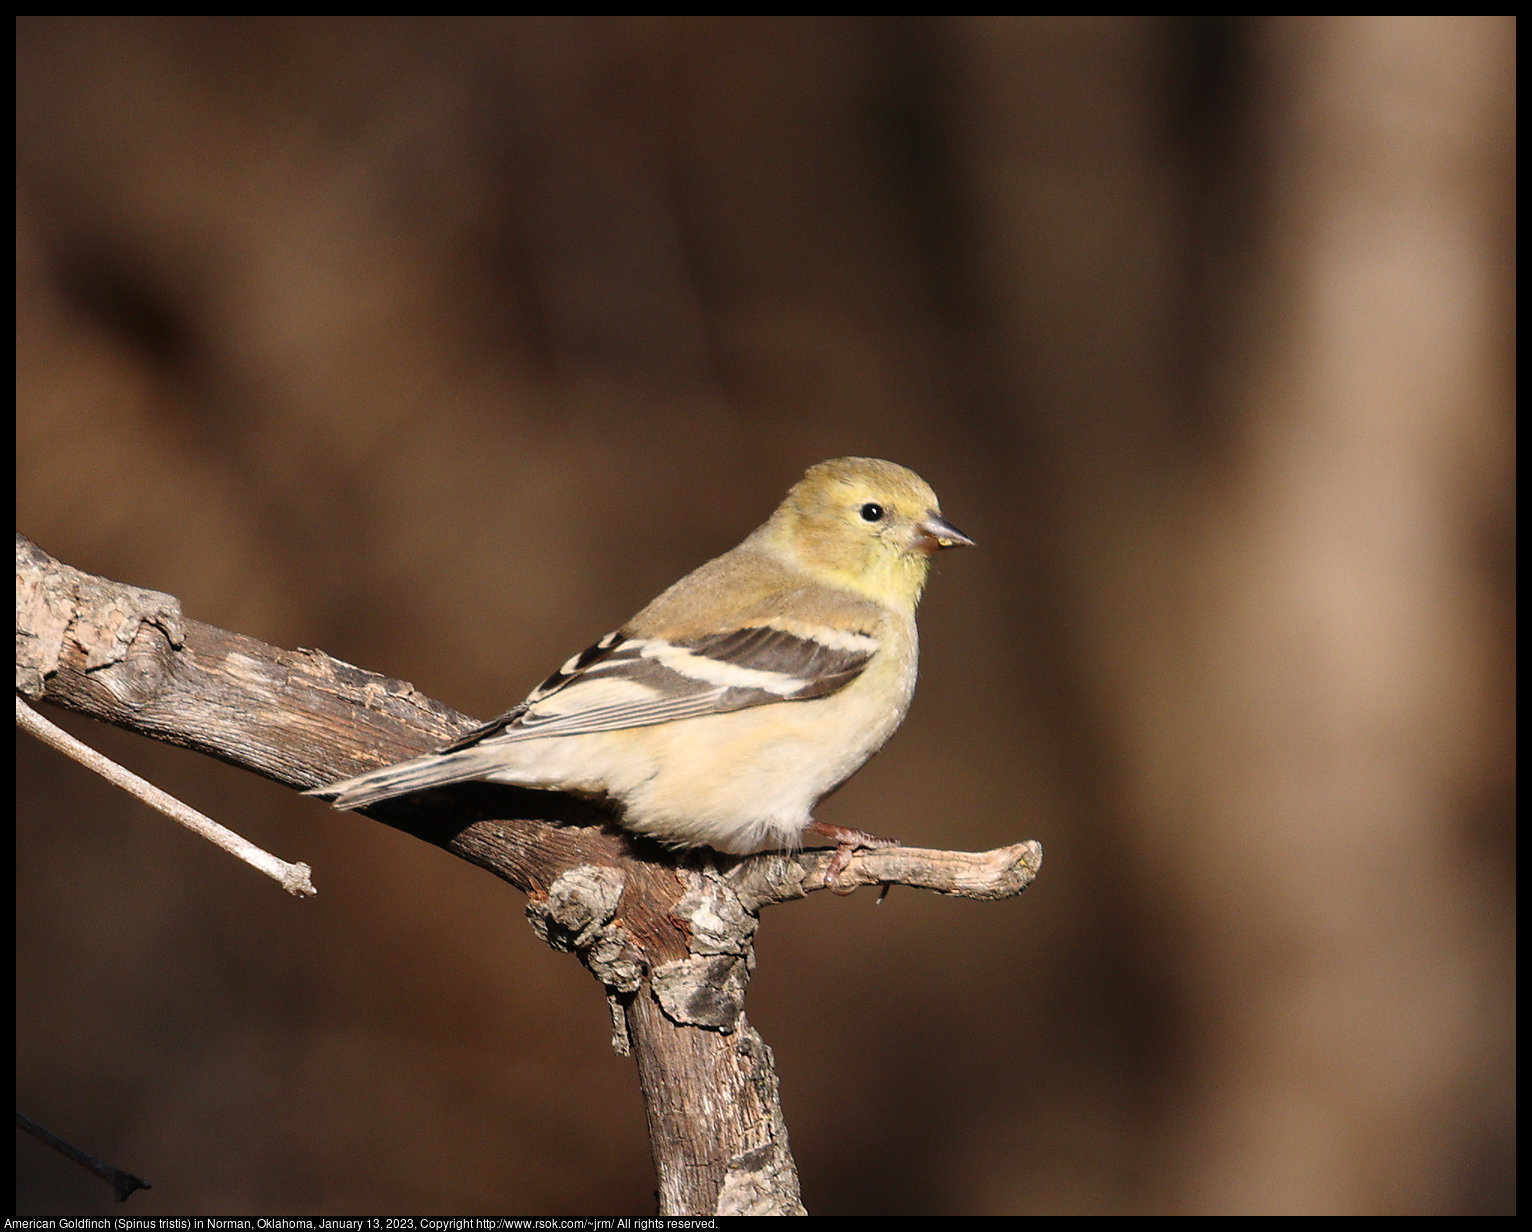 American Goldfinch (Spinus tristis) in Norman, Oklahoma, January 13, 2023